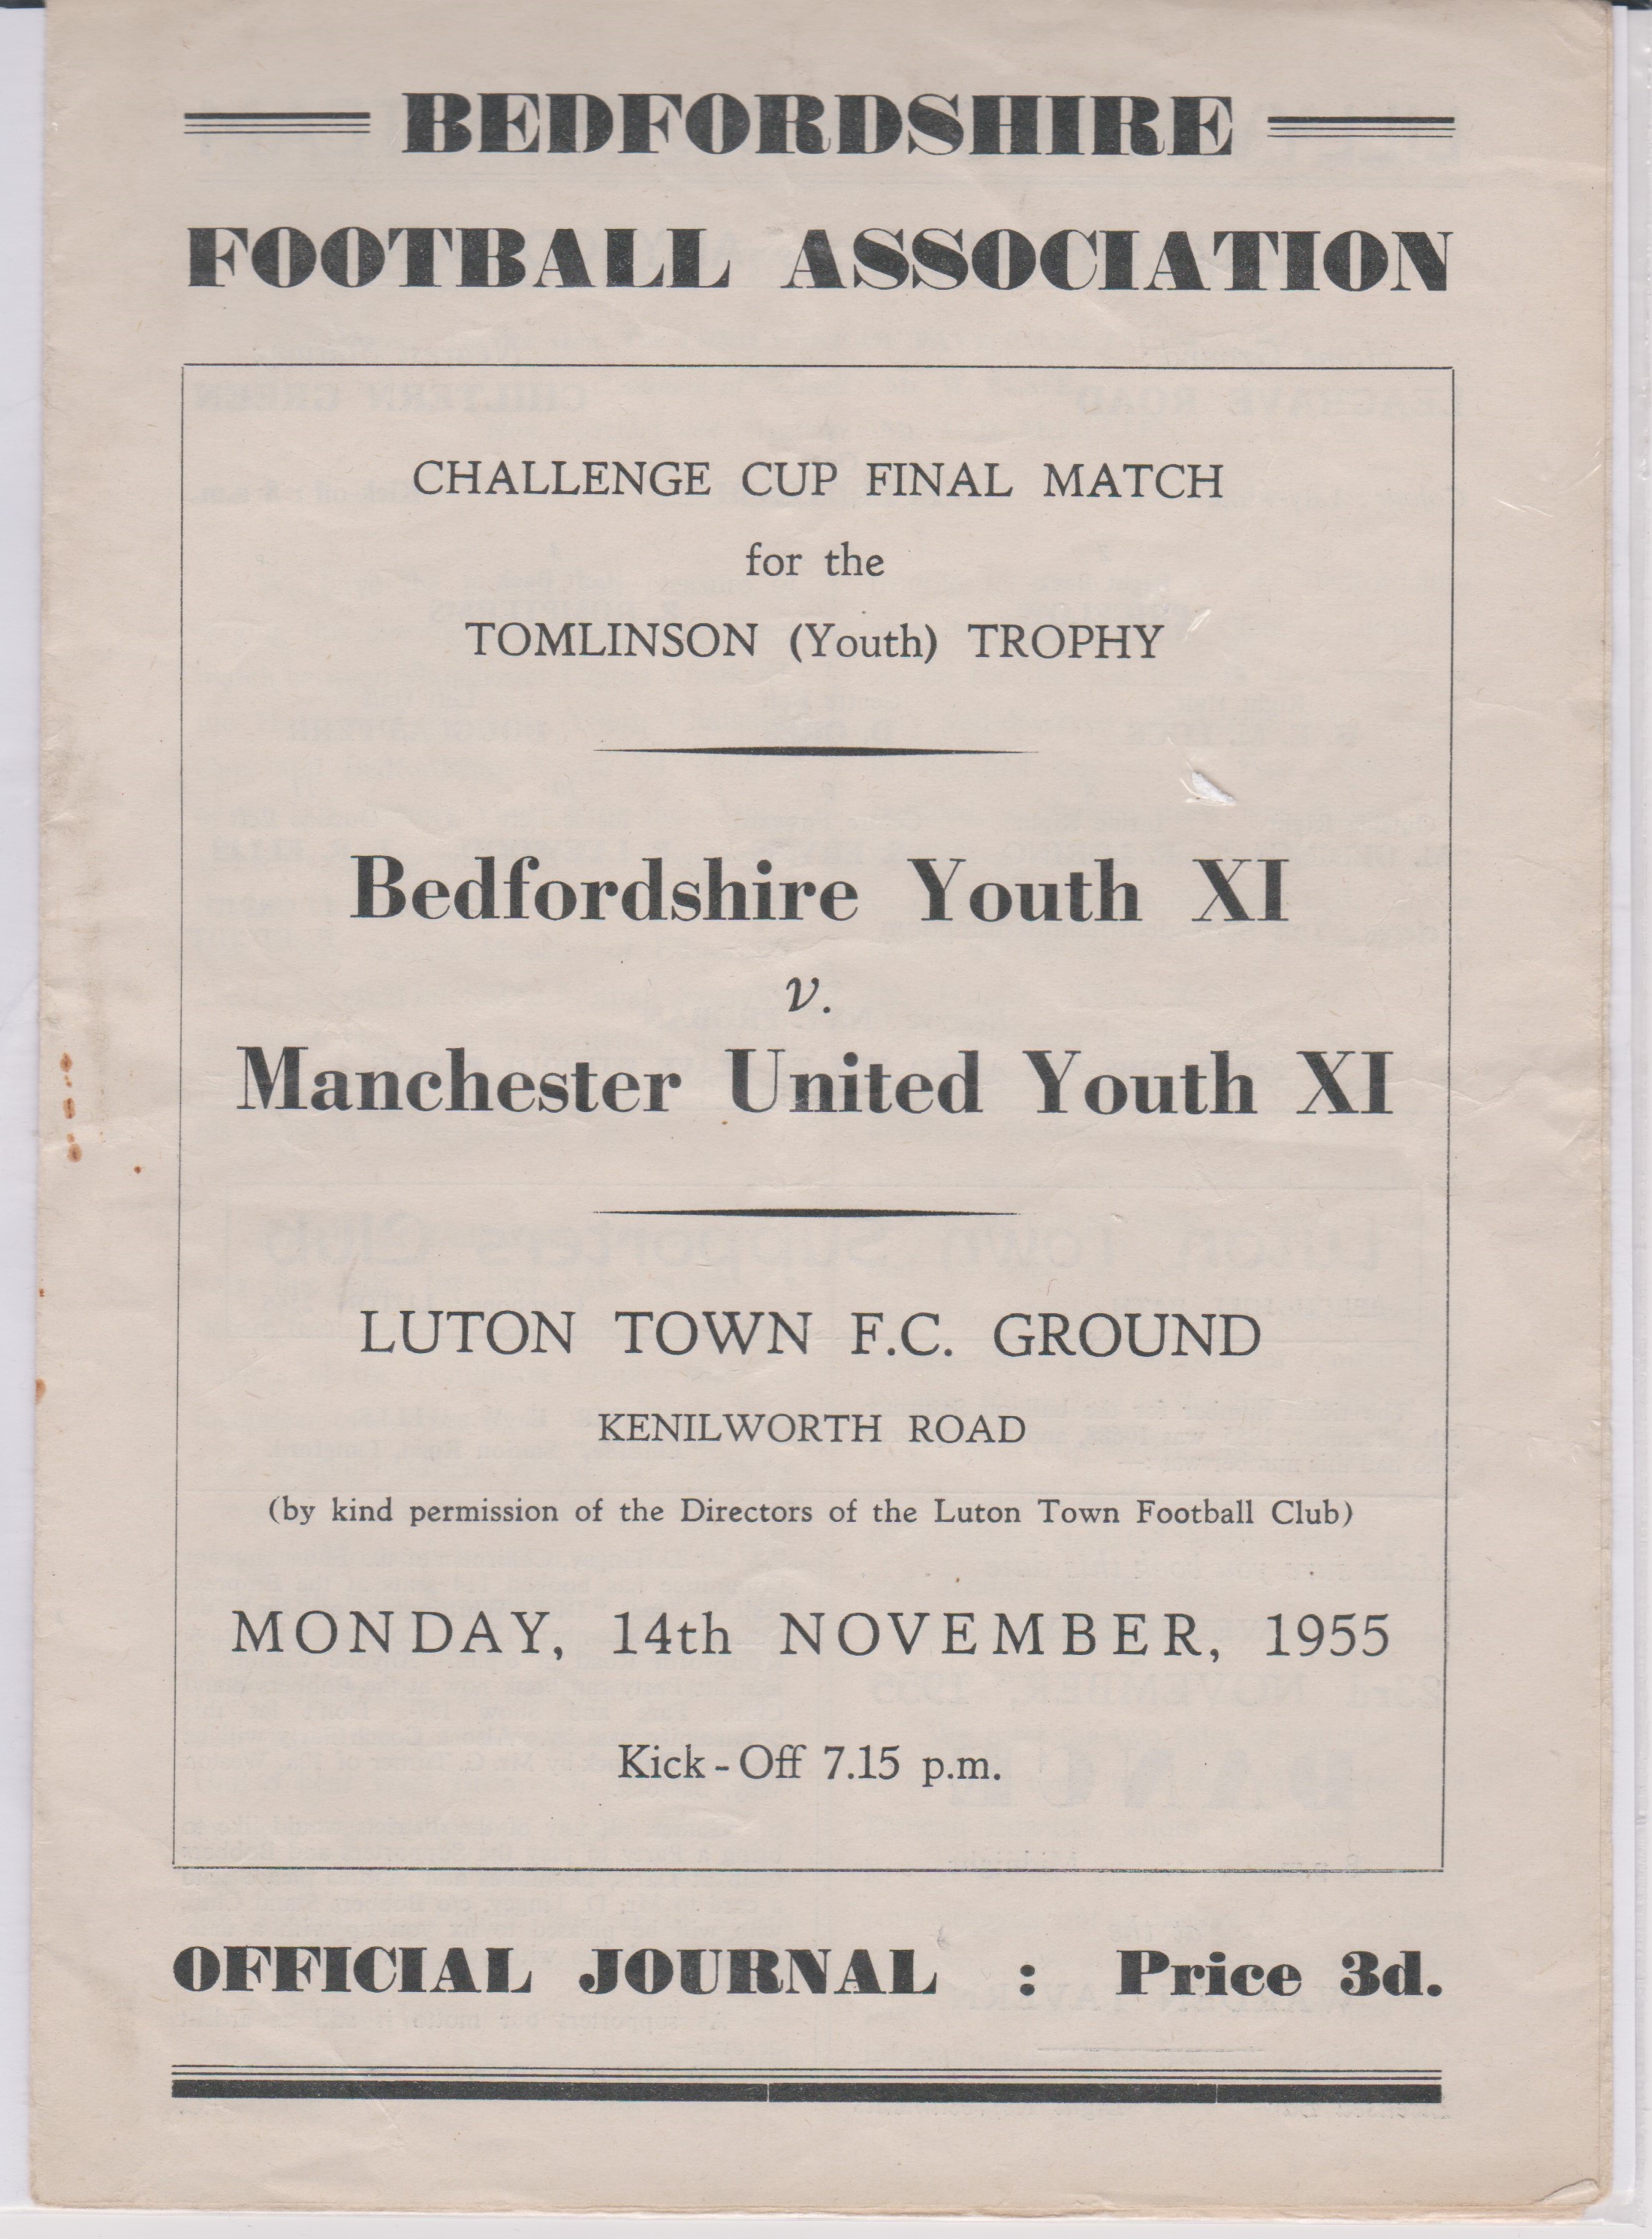 Programme Bedfordshire XI v Manchester United at Kenilworth Road, Luton. Challenge Cup Final for the